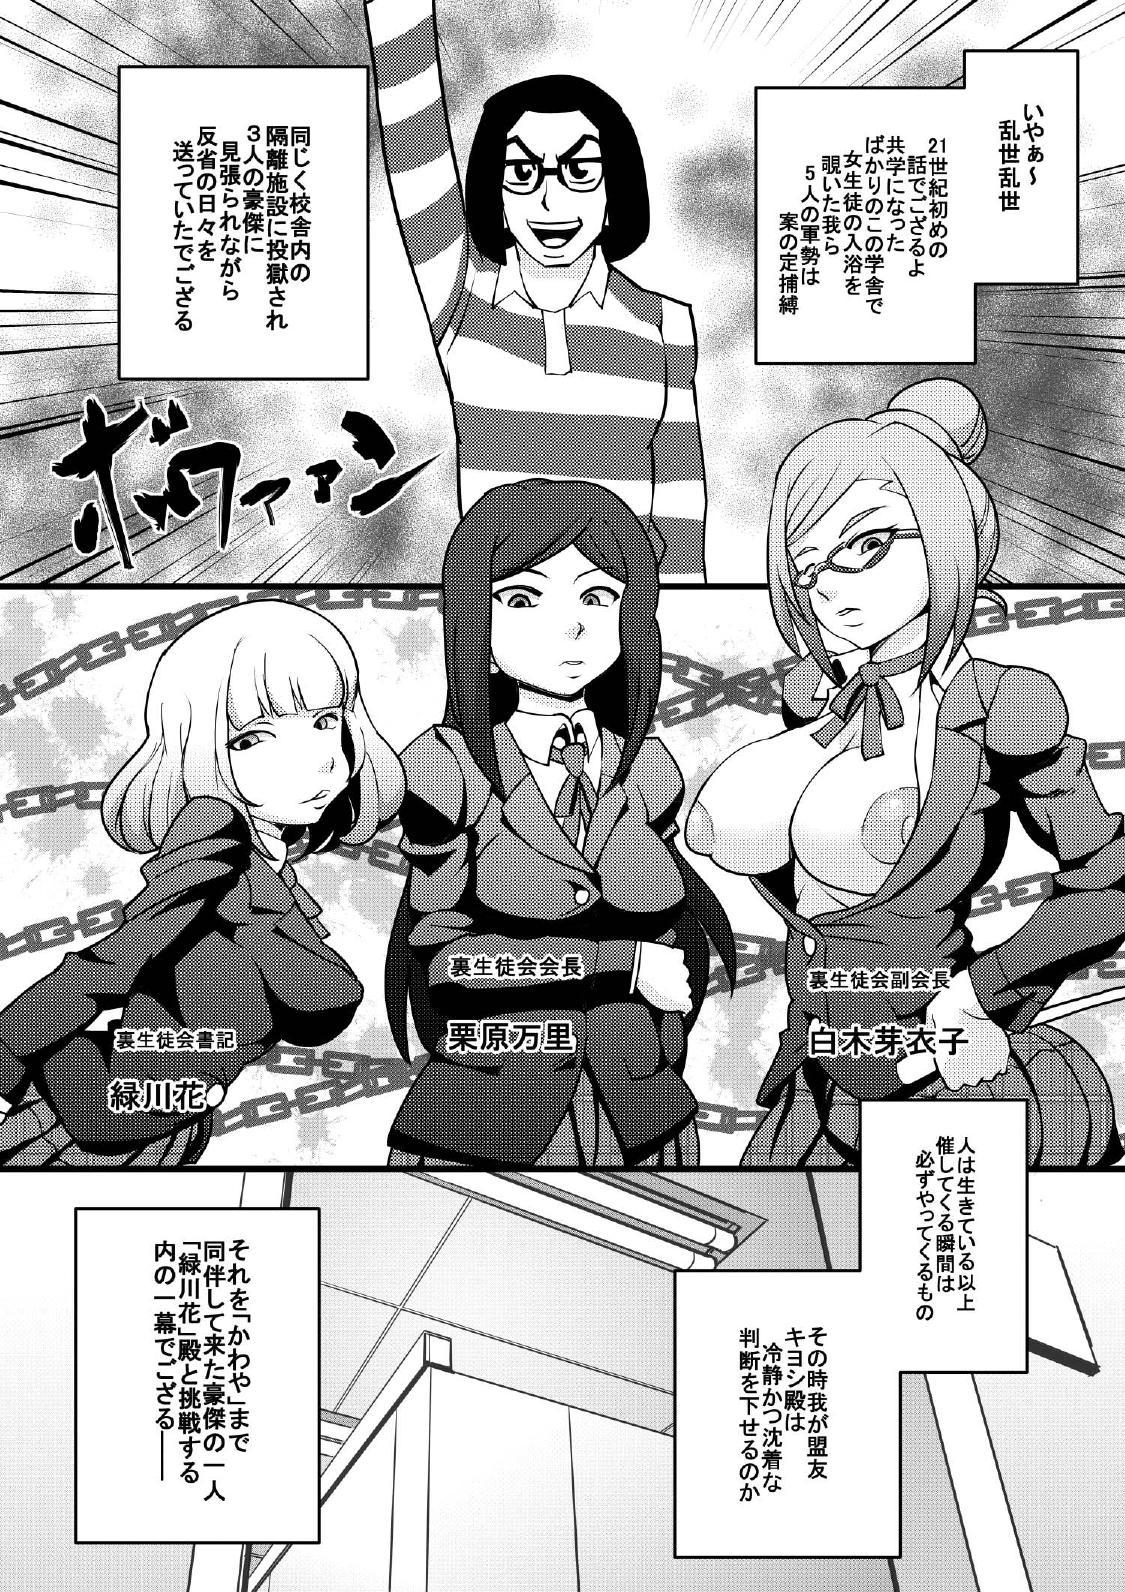 Hot Girls Getting Fucked Prizun! - Prison school Gays - Page 3